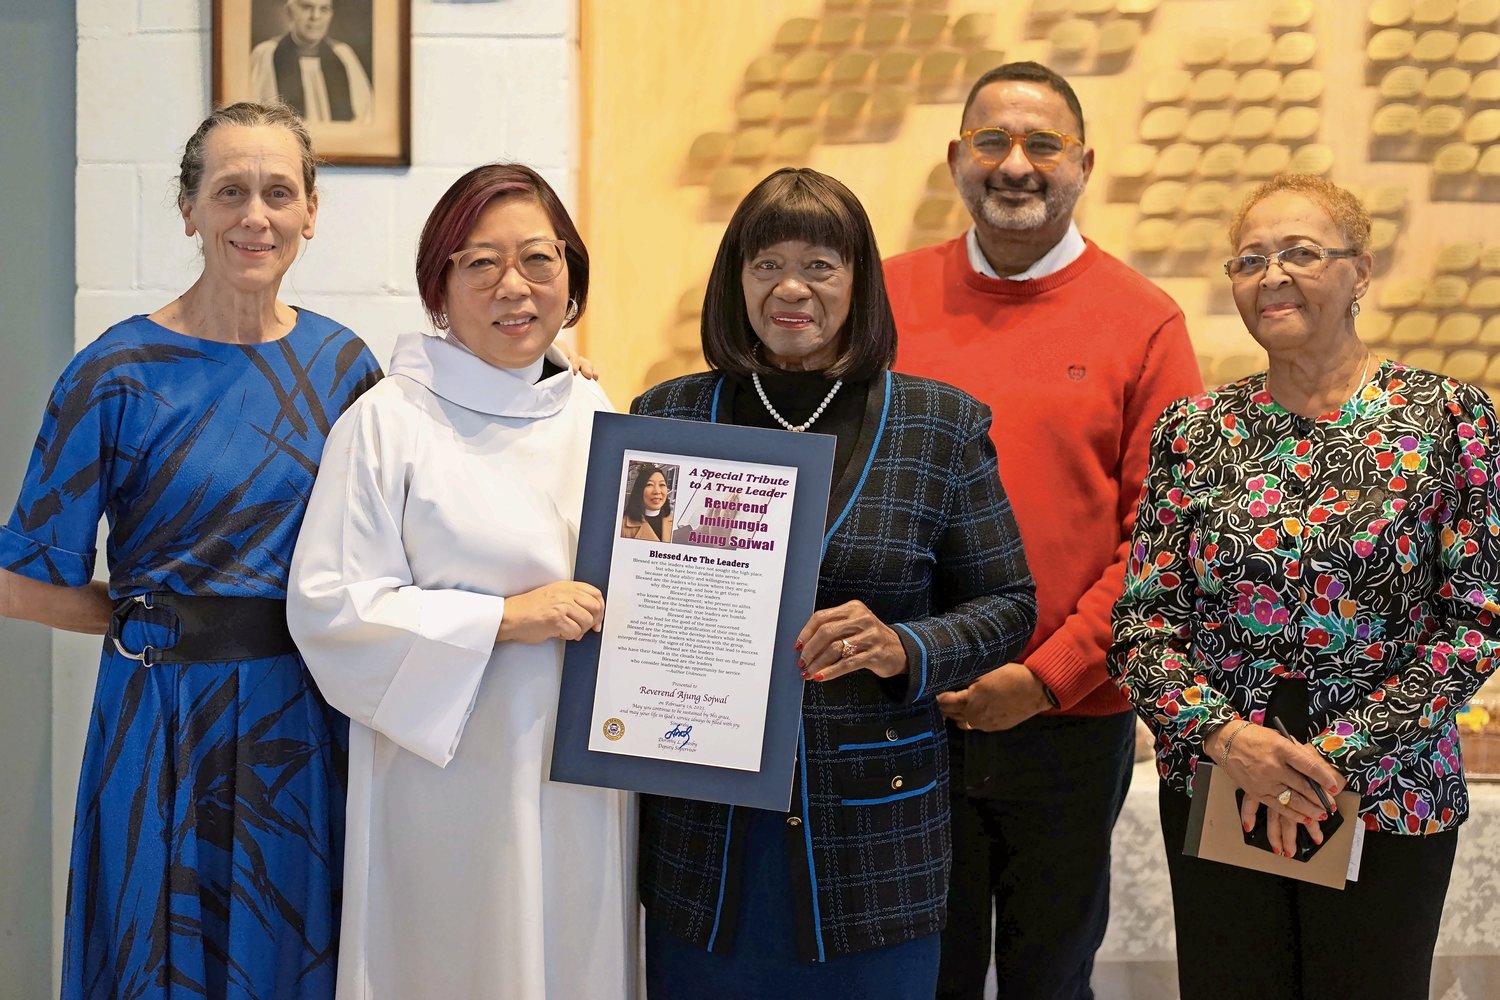 Deputy Town Supervisor Dorothy L. Goosby presented Rev. Imlijungla Sojwal with a citation for service at St. George’s Episcopal Church, Hempstead. From left, Reine Bethany, St. George’s warden, Sojwal, Goosby, Milind Sojwal, the reverend’s husband, and Evelyn Meade, St. George’s senior warden.